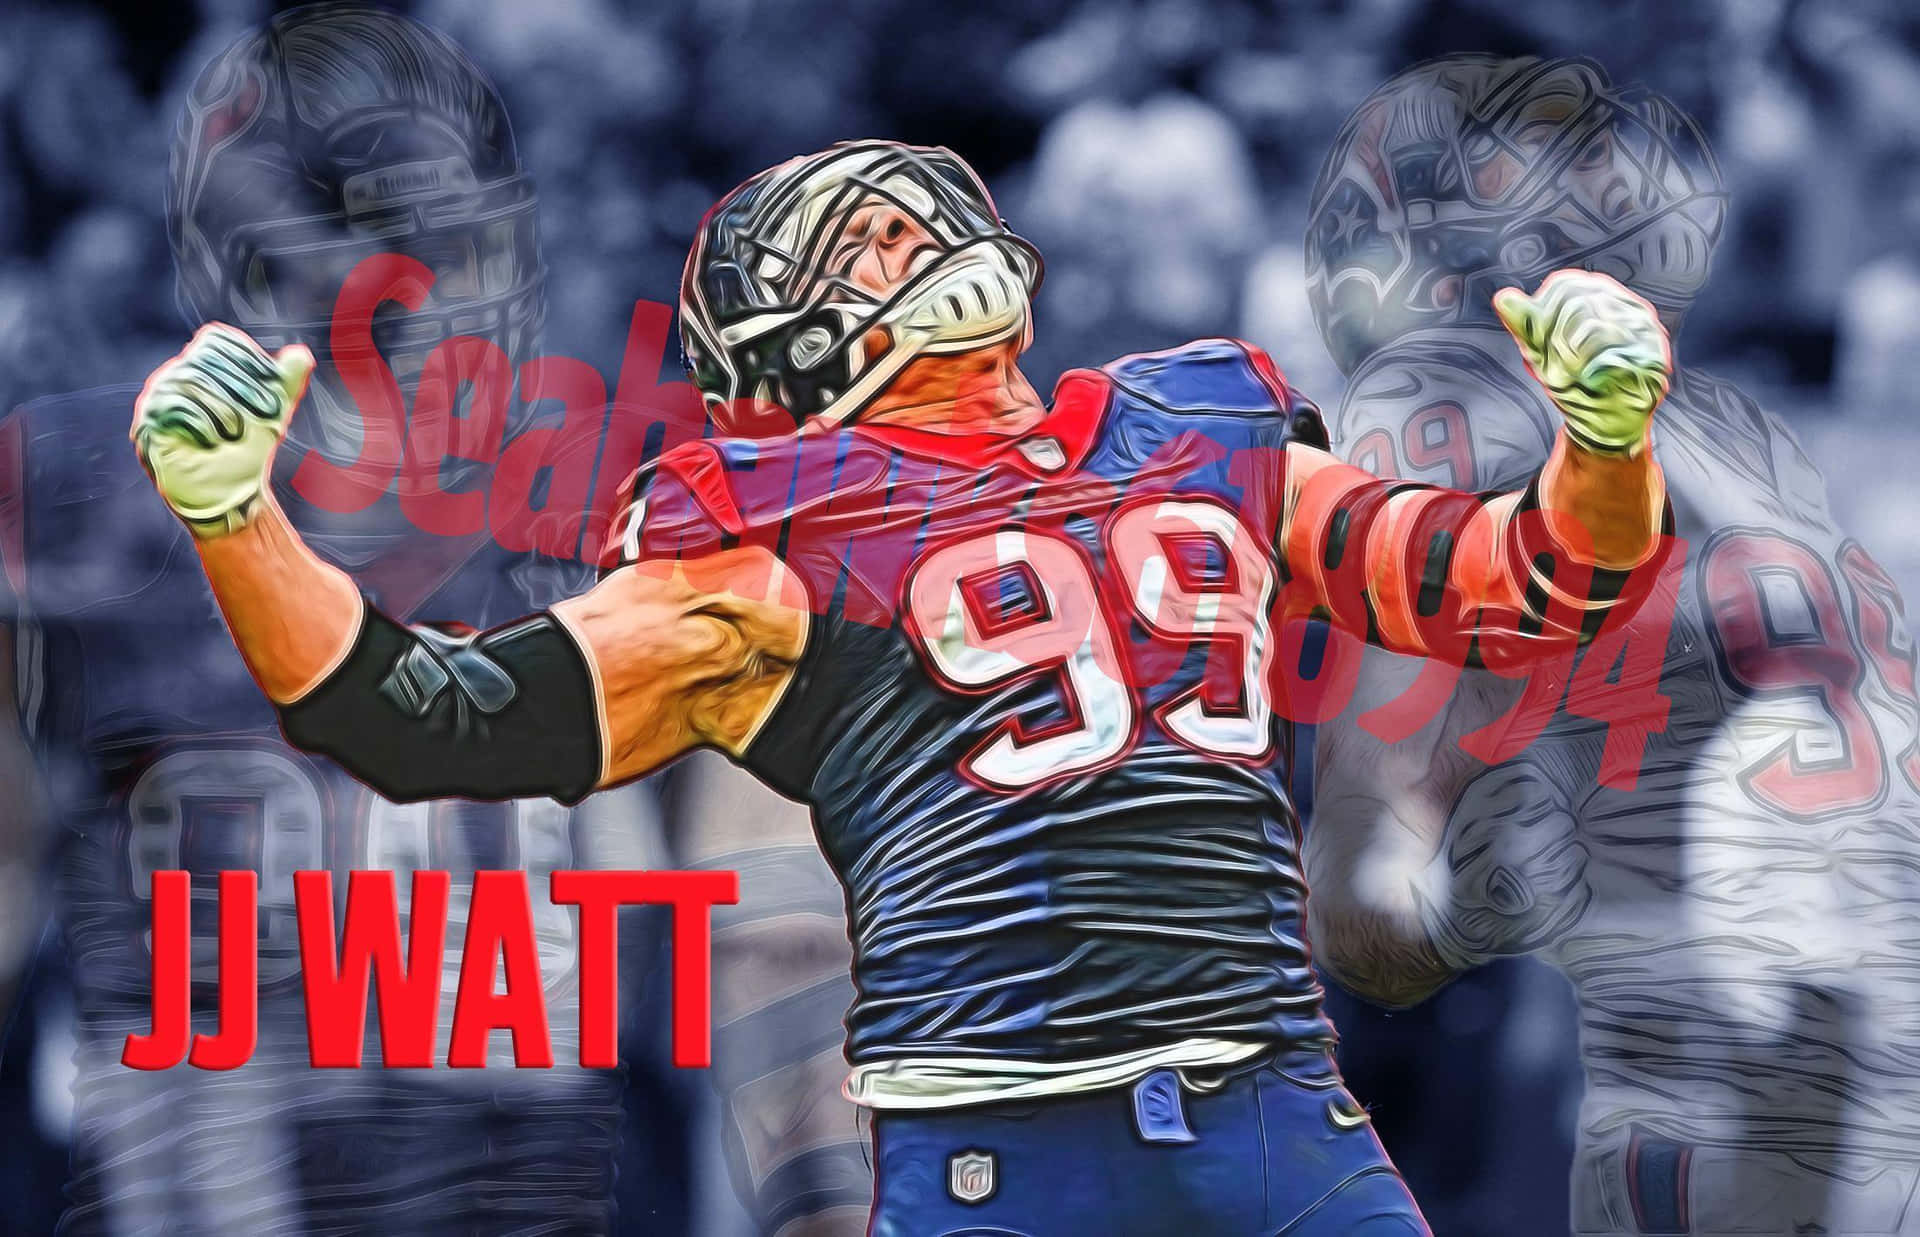 JJ Watt Injury Update: Houston Texans Defensive End Takes Time To Recover Wallpaper